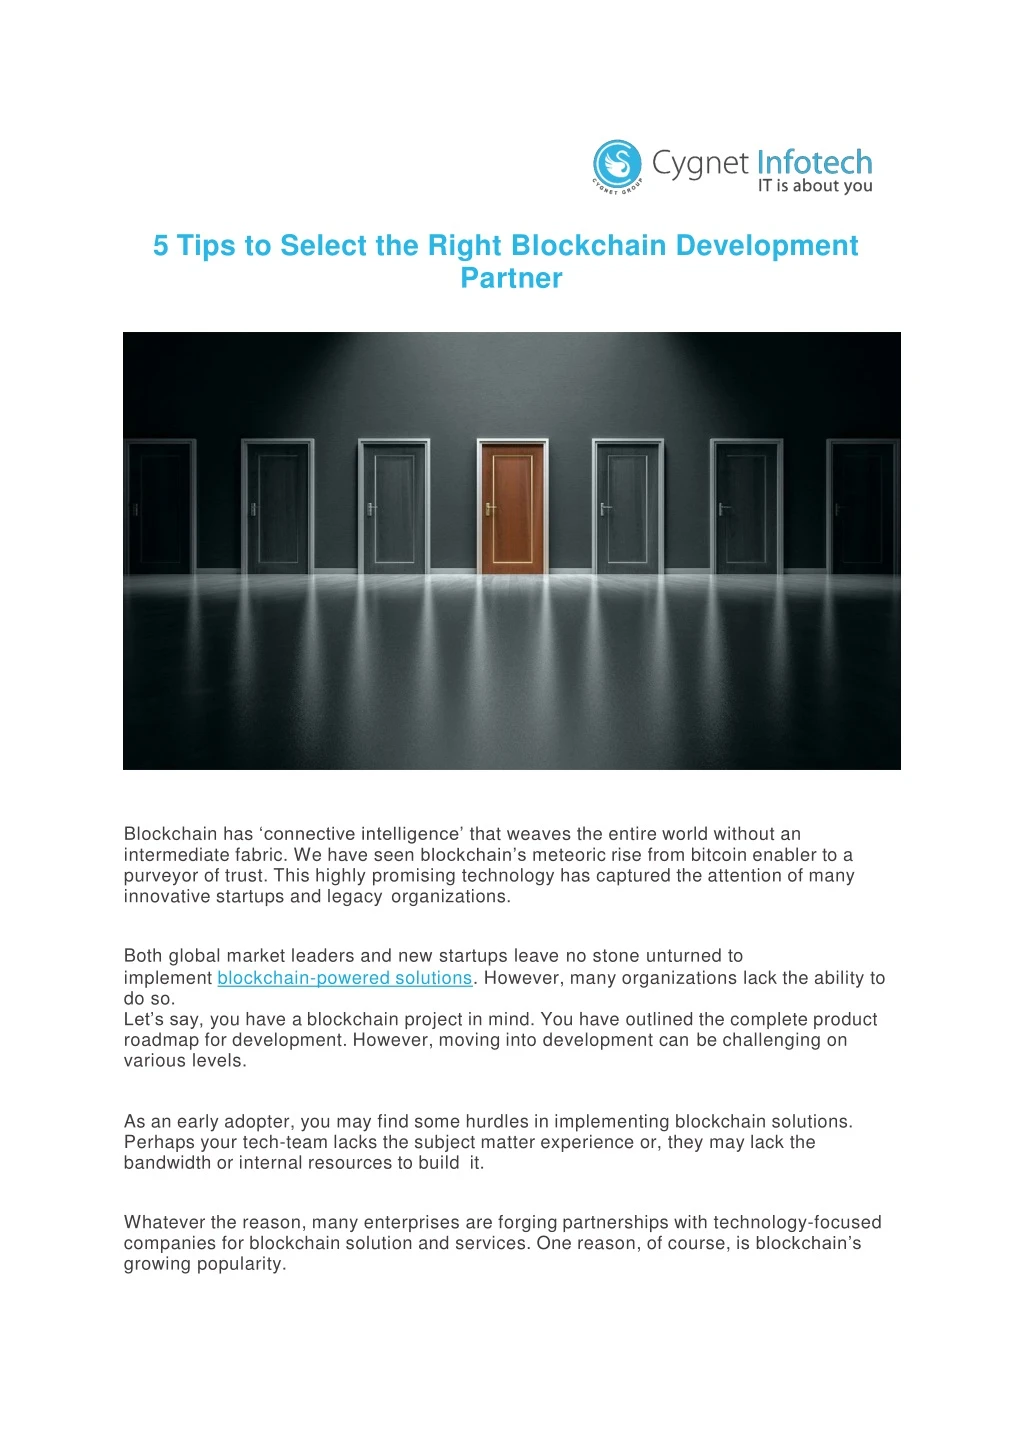 5 tips to select the right blockchain development